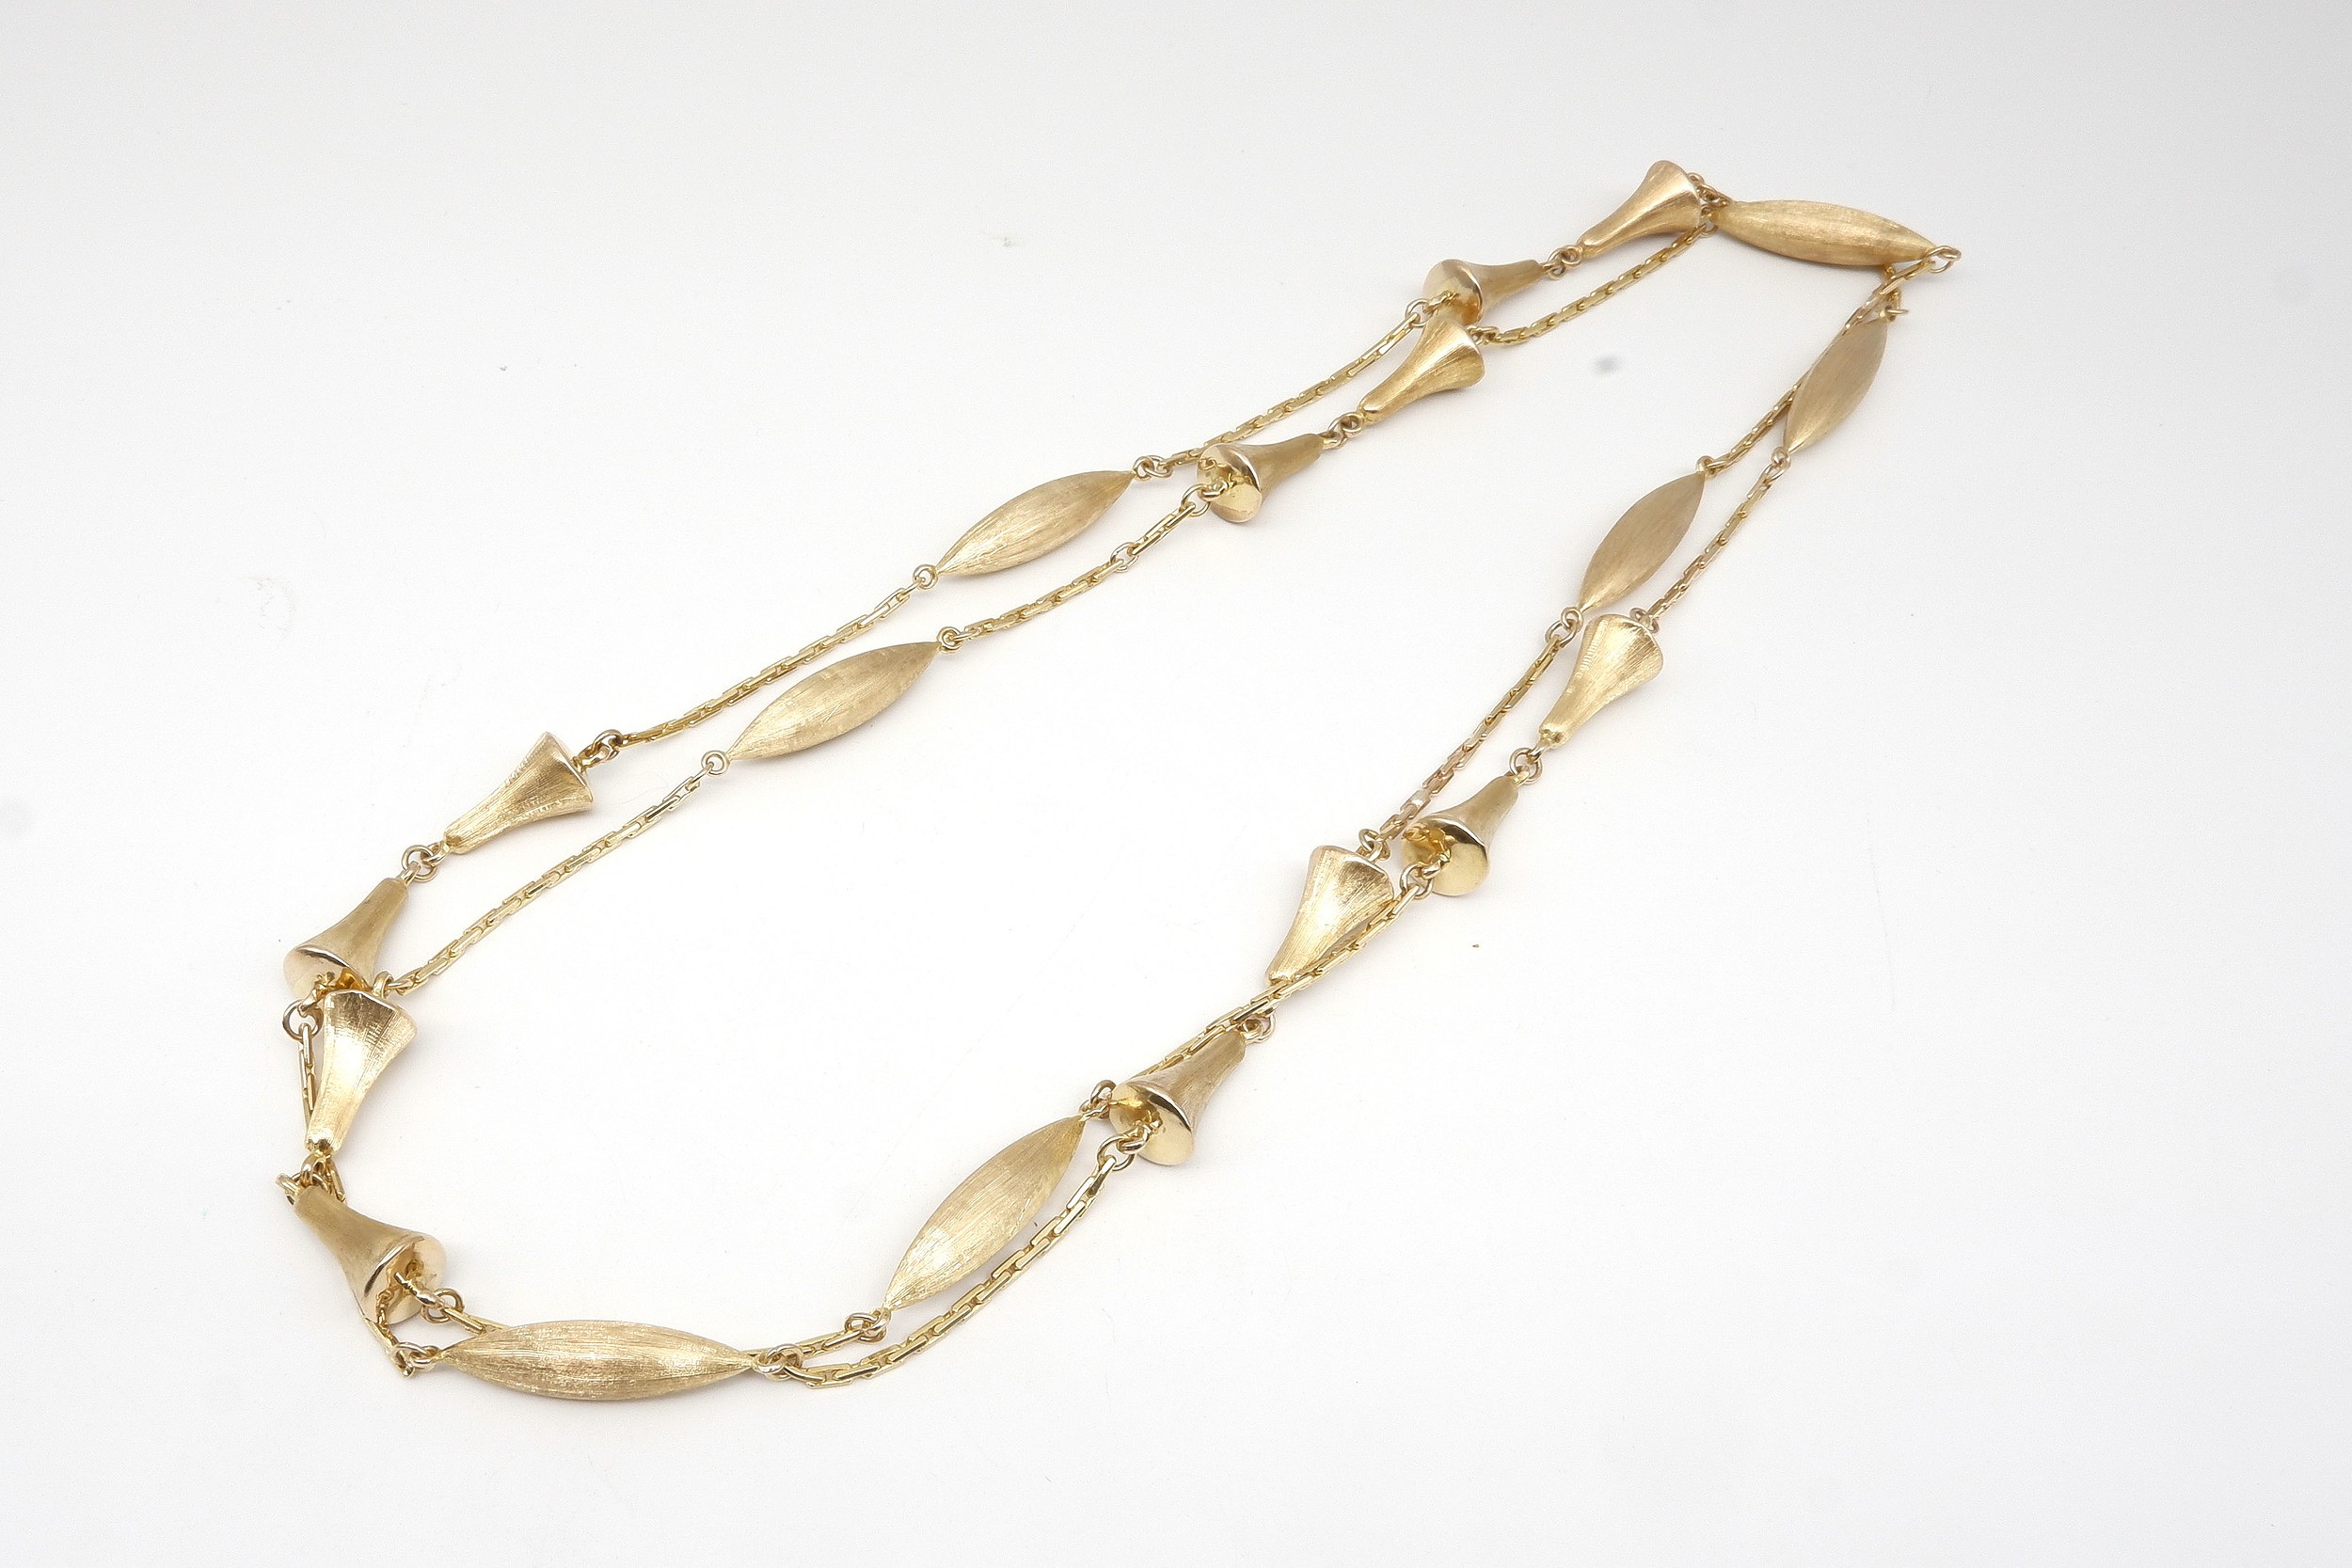 '14ct Yellow Gold Chain with Inserted Link Alternating with Bell and Marquise Shaped Hollow Links, 30.9g'